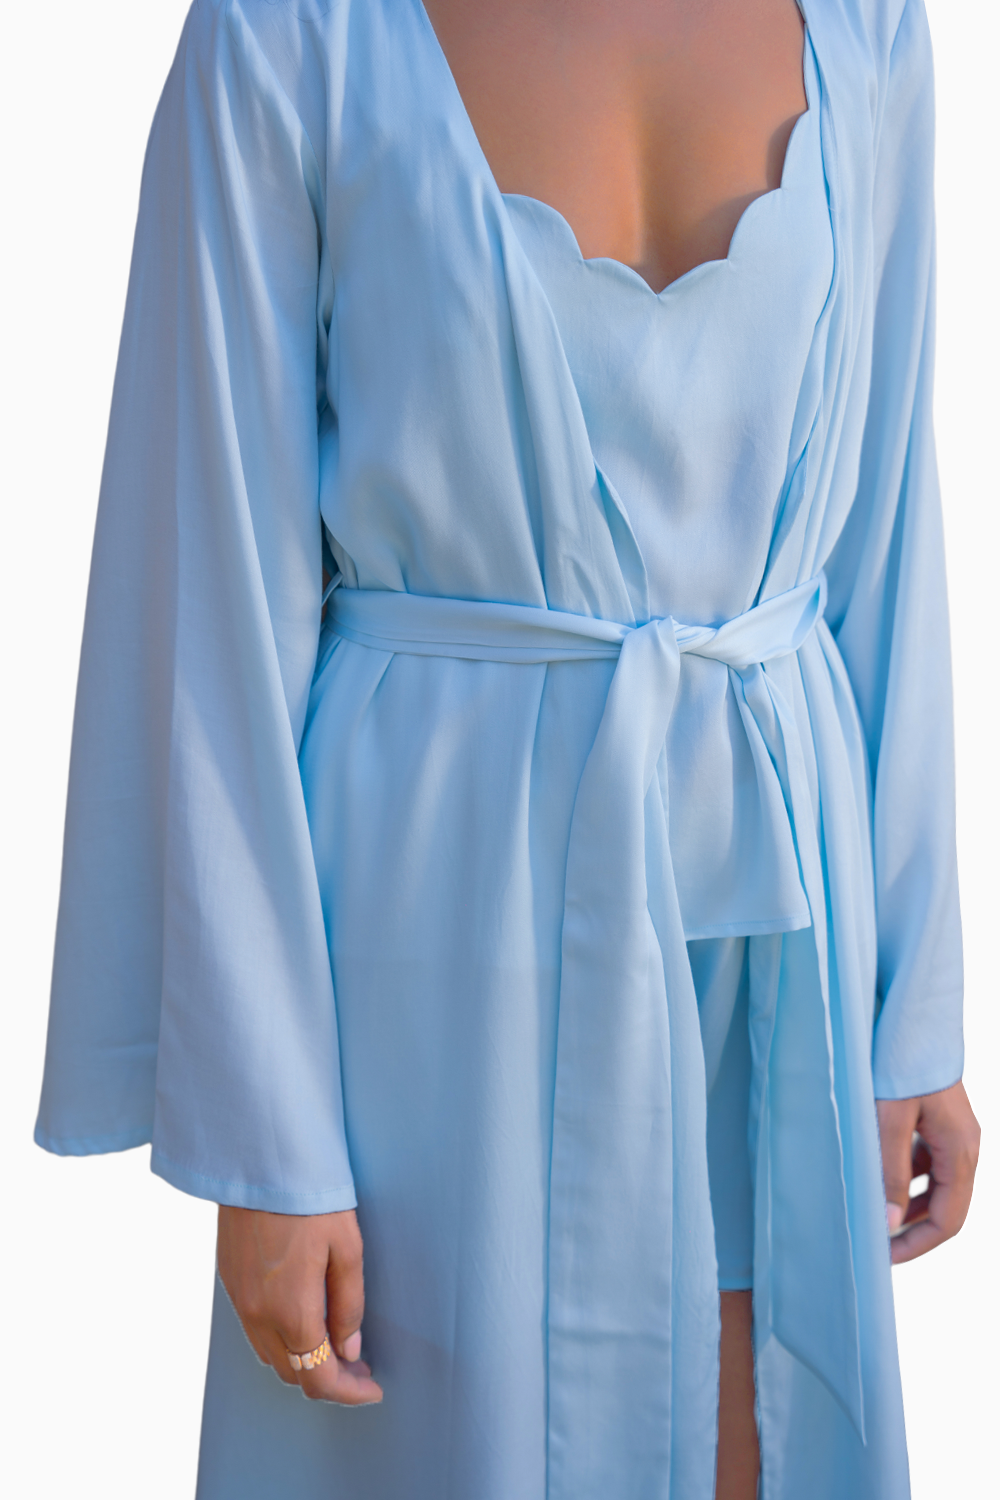 Bit of Blue Camisole and Robe Set